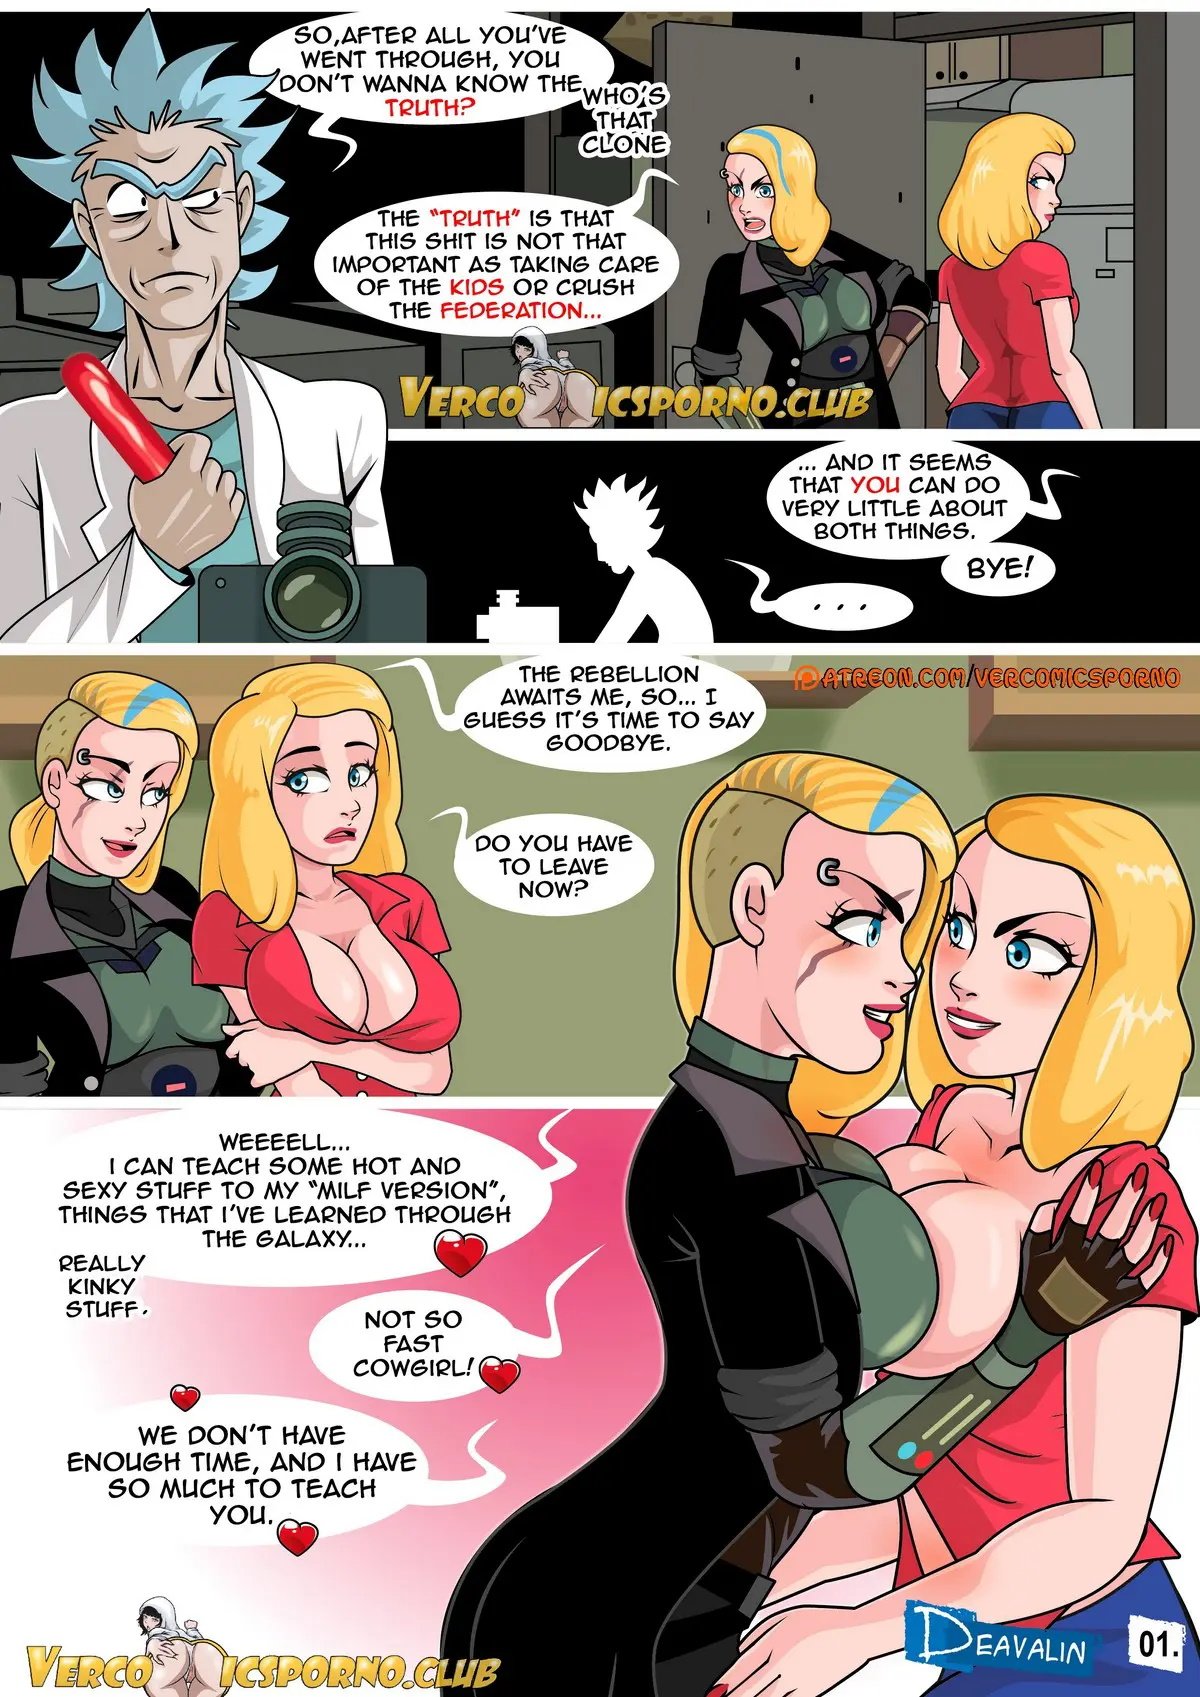 Beth And Beth (Rick and Morty) [Deavalin] - 1 . Beth And Beth - Chapter 1  (Rick and Morty) [Deavalin] - AllPornComic